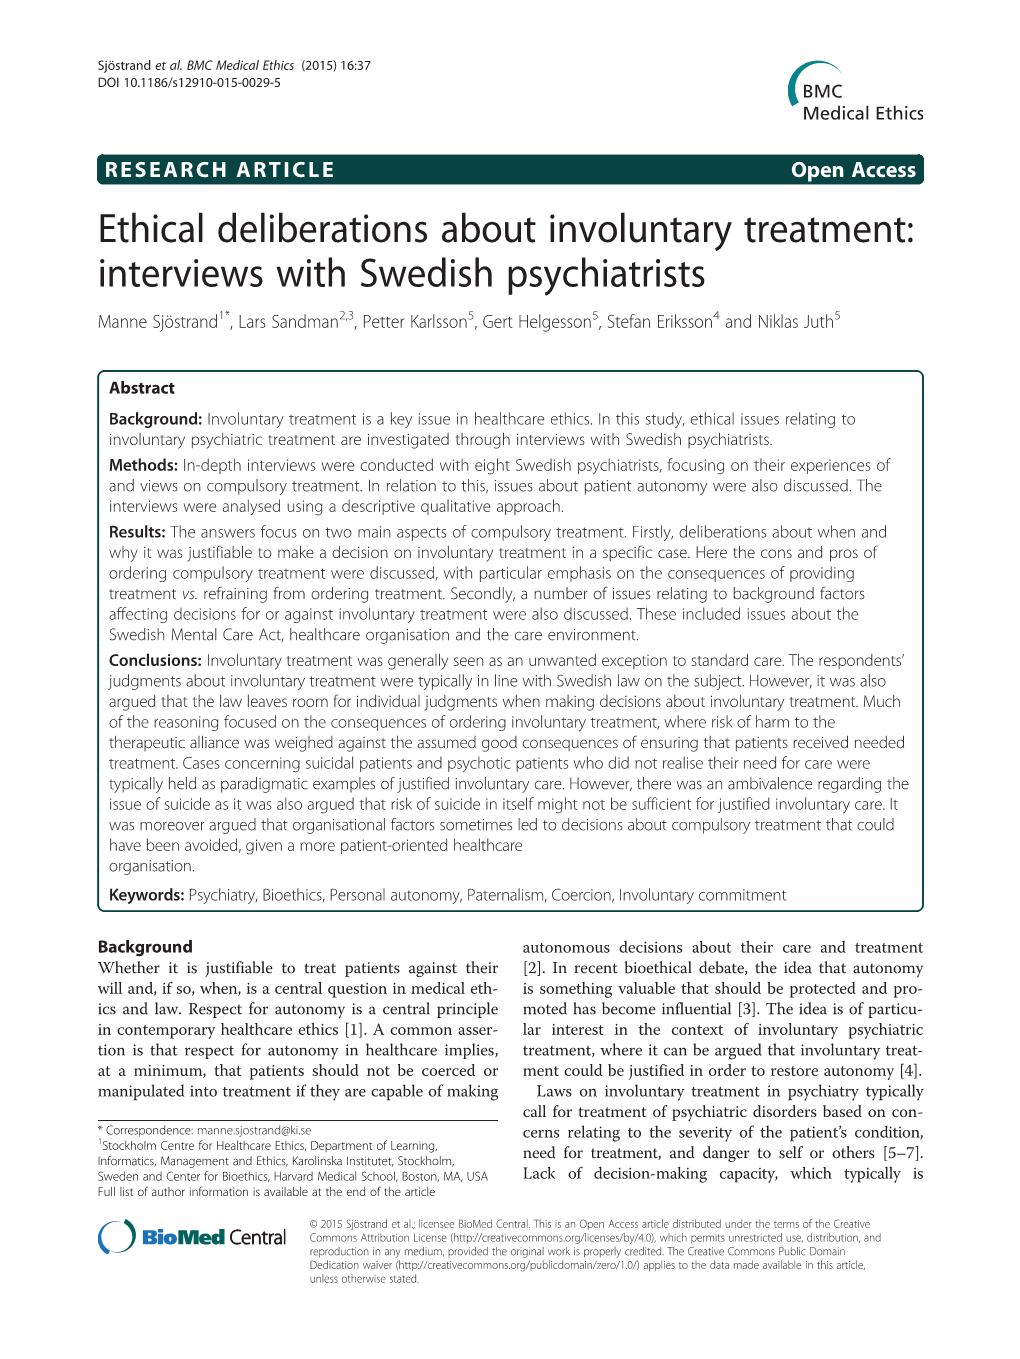 Ethical Deliberations About Involuntary Treatment: Interviews with Swedish